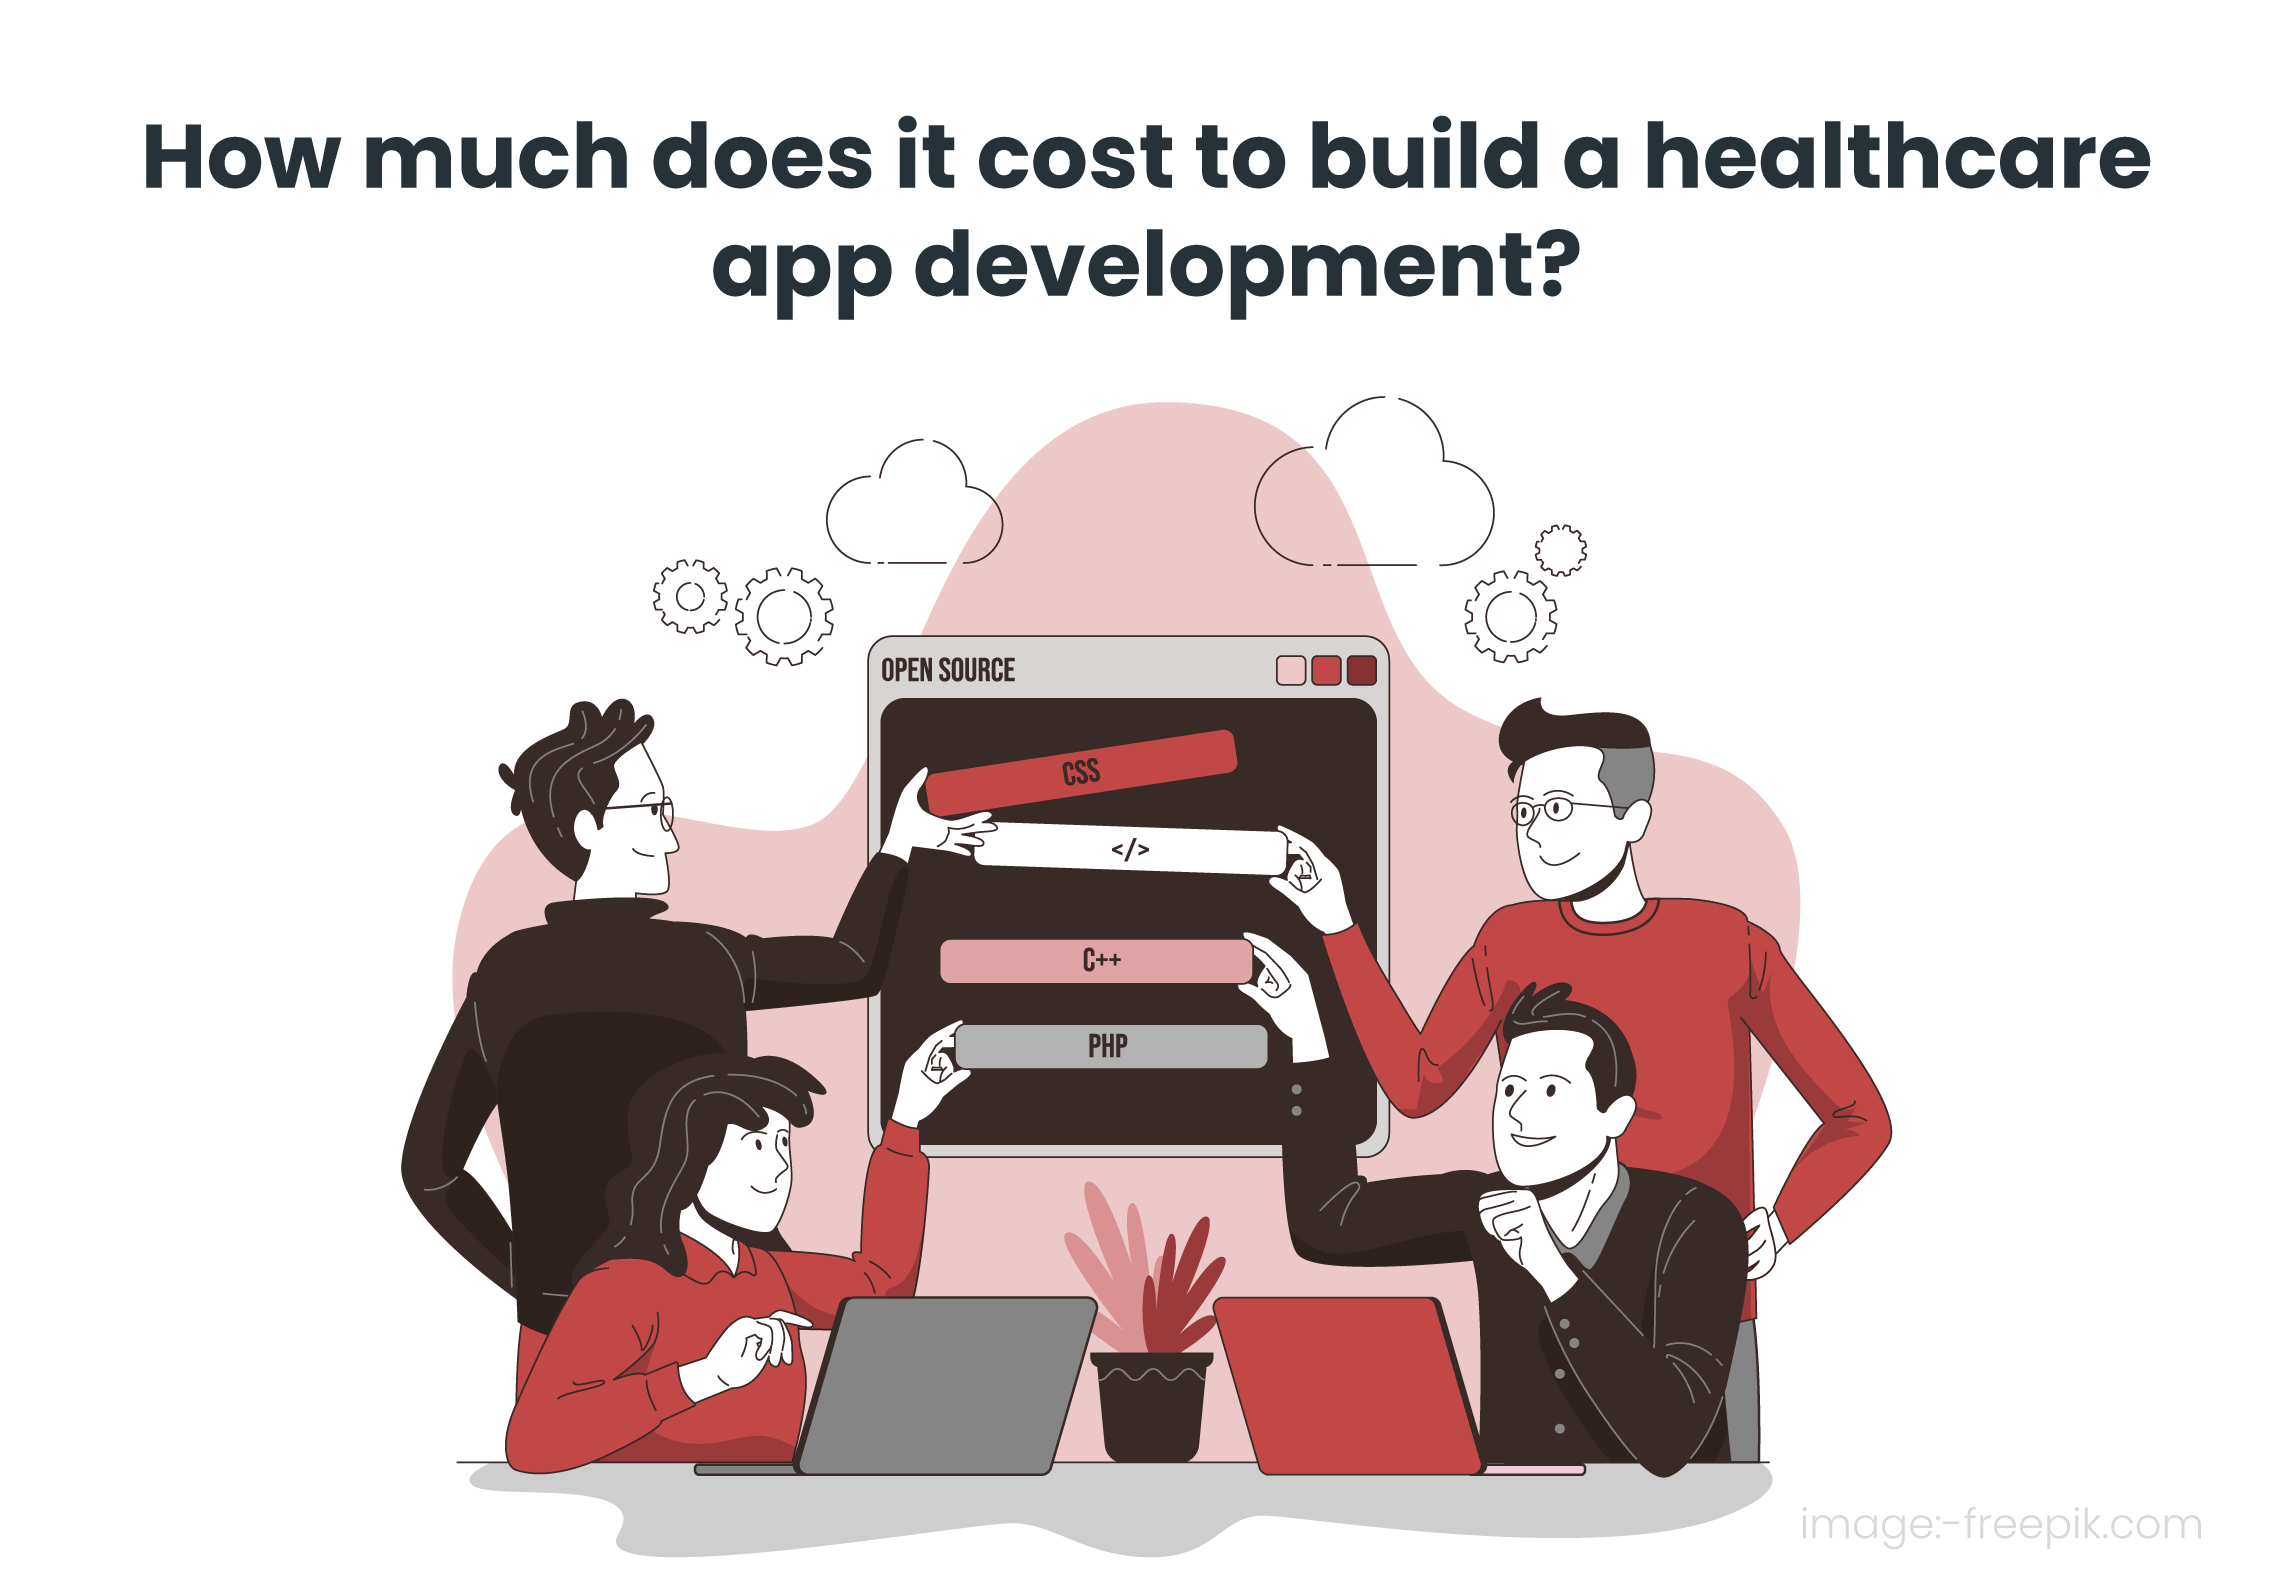 How Much Does It Cost To Build A Healthcare App Development